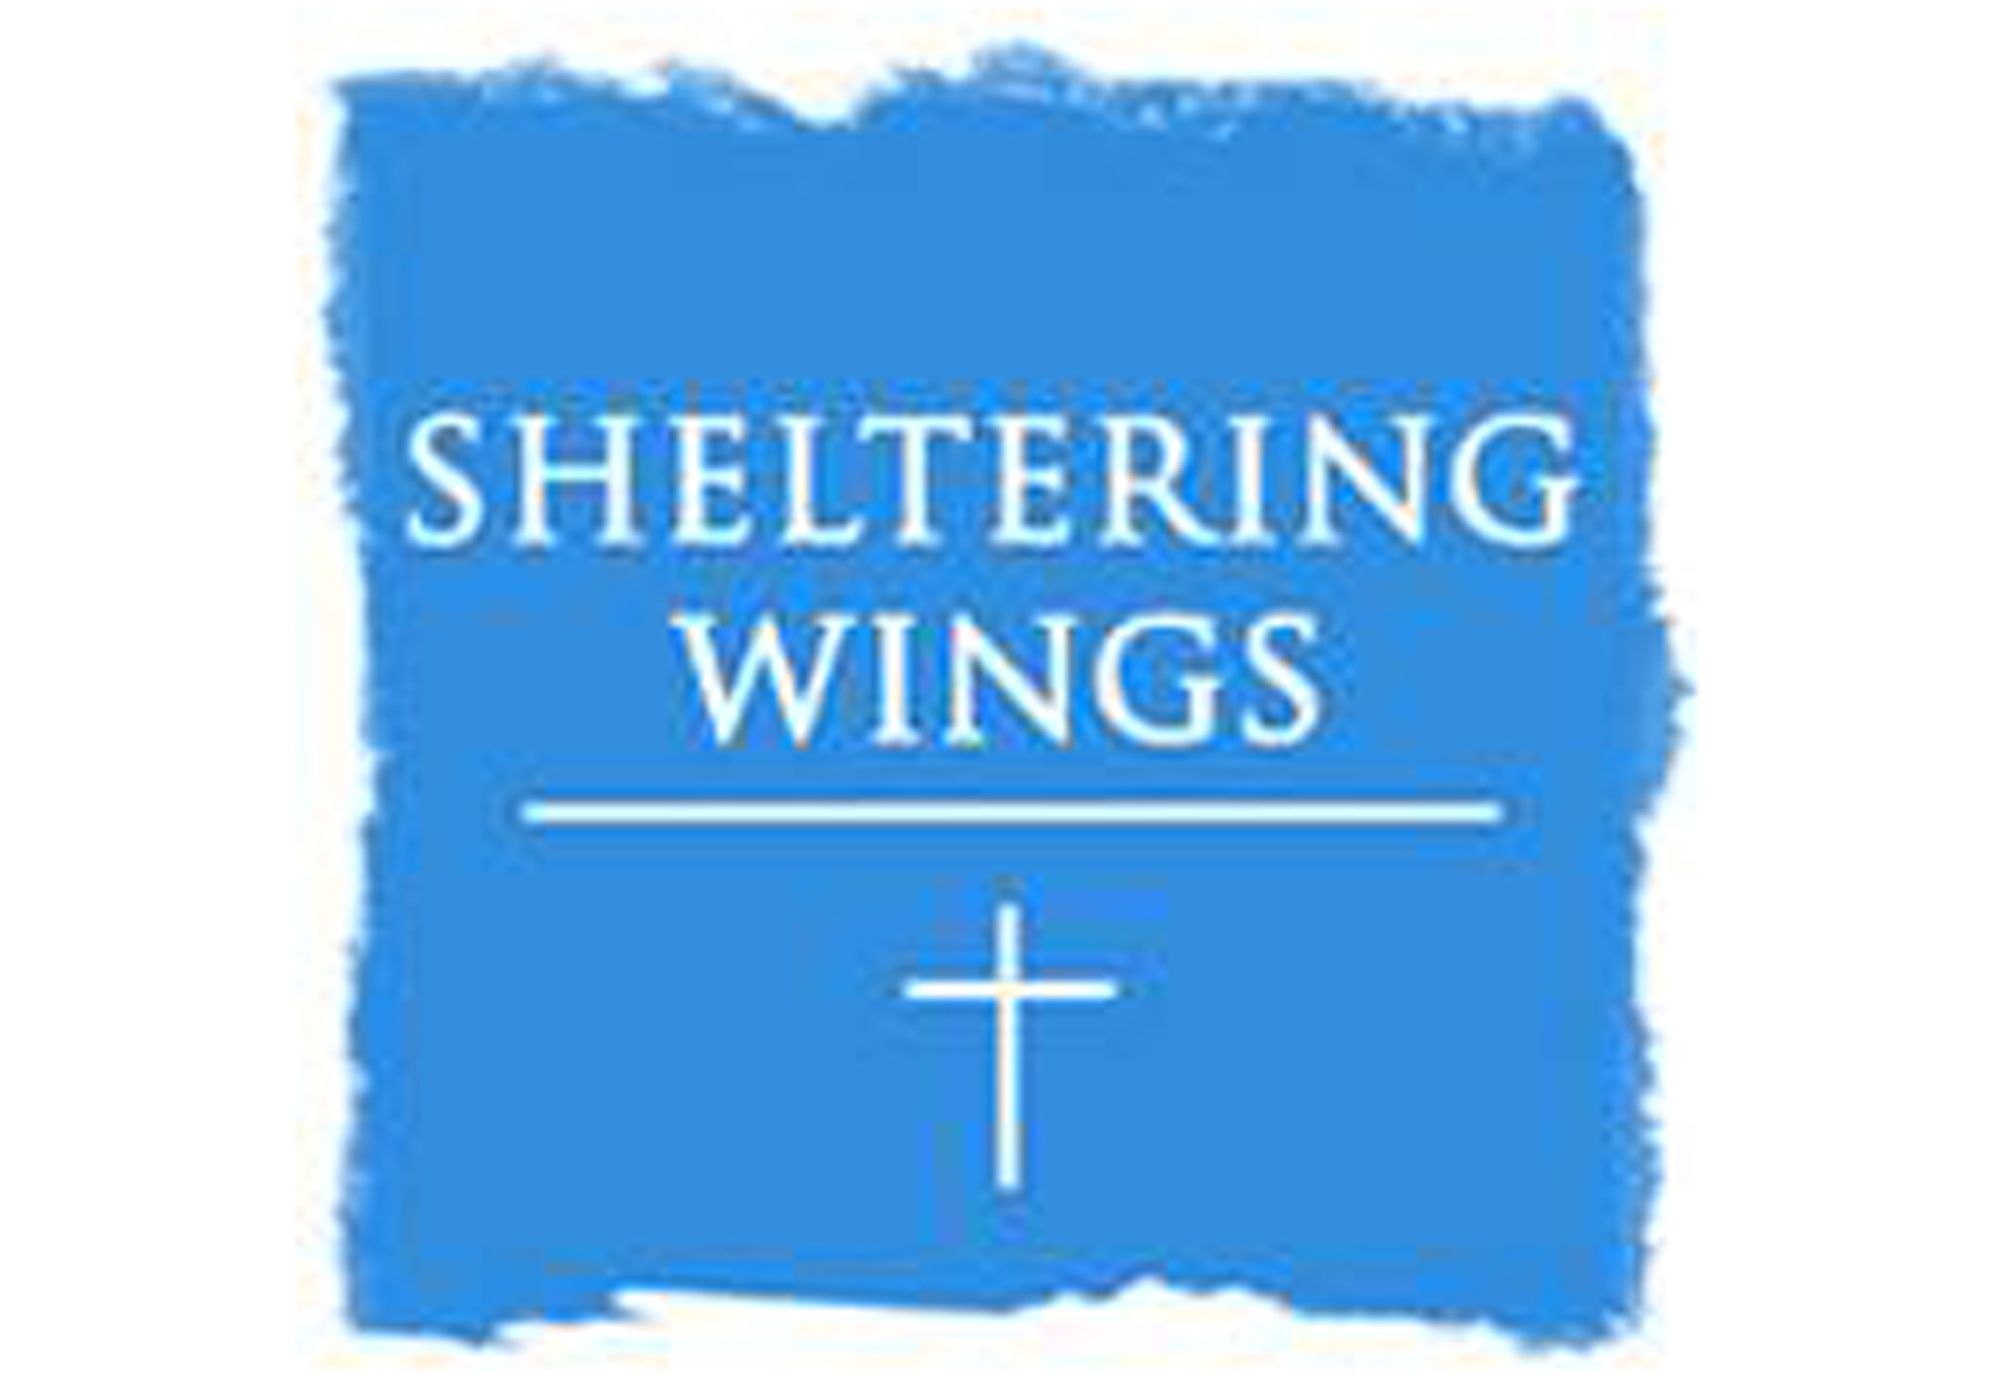 Sheltering Wings Receives HCCF Grant for Professional Development